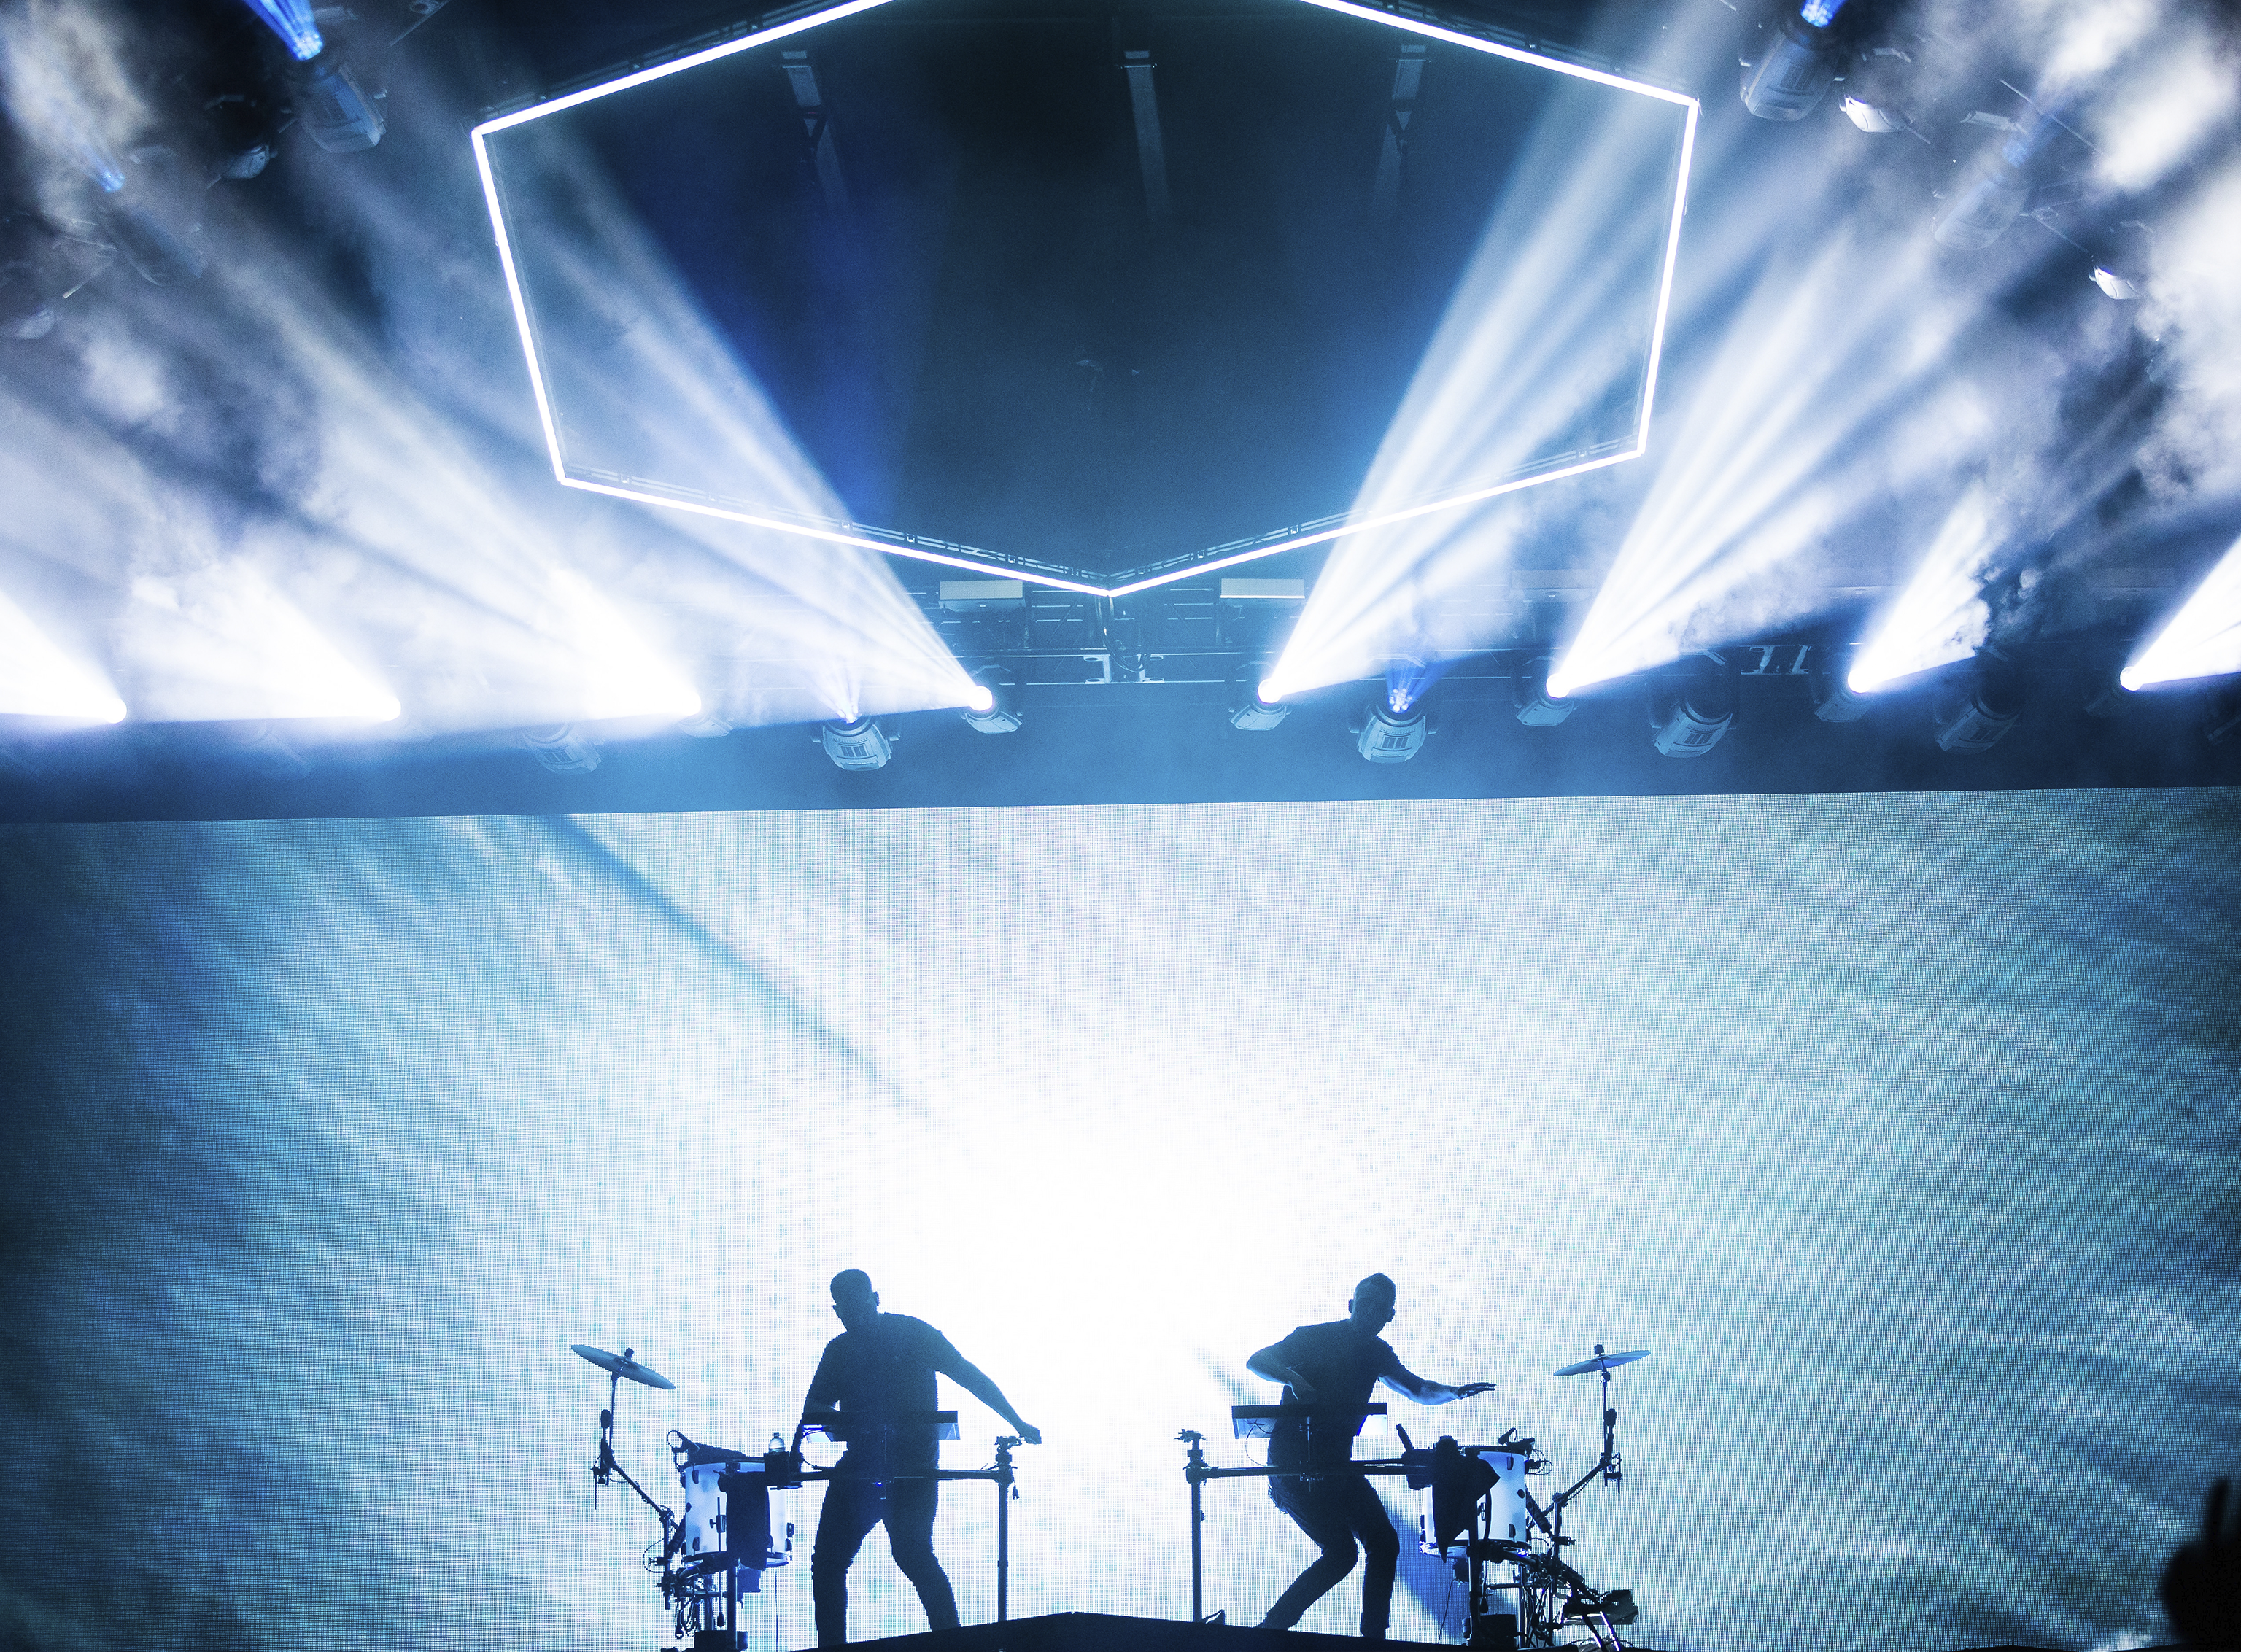 Two musicians in the band Odesza are on stage at a concert, backlit by a giant glowing blue screen. Each man is playing half of a drum kit. Above them, a glowing hexagon is suspended in the air and spotlights are lighting up the night sky. 